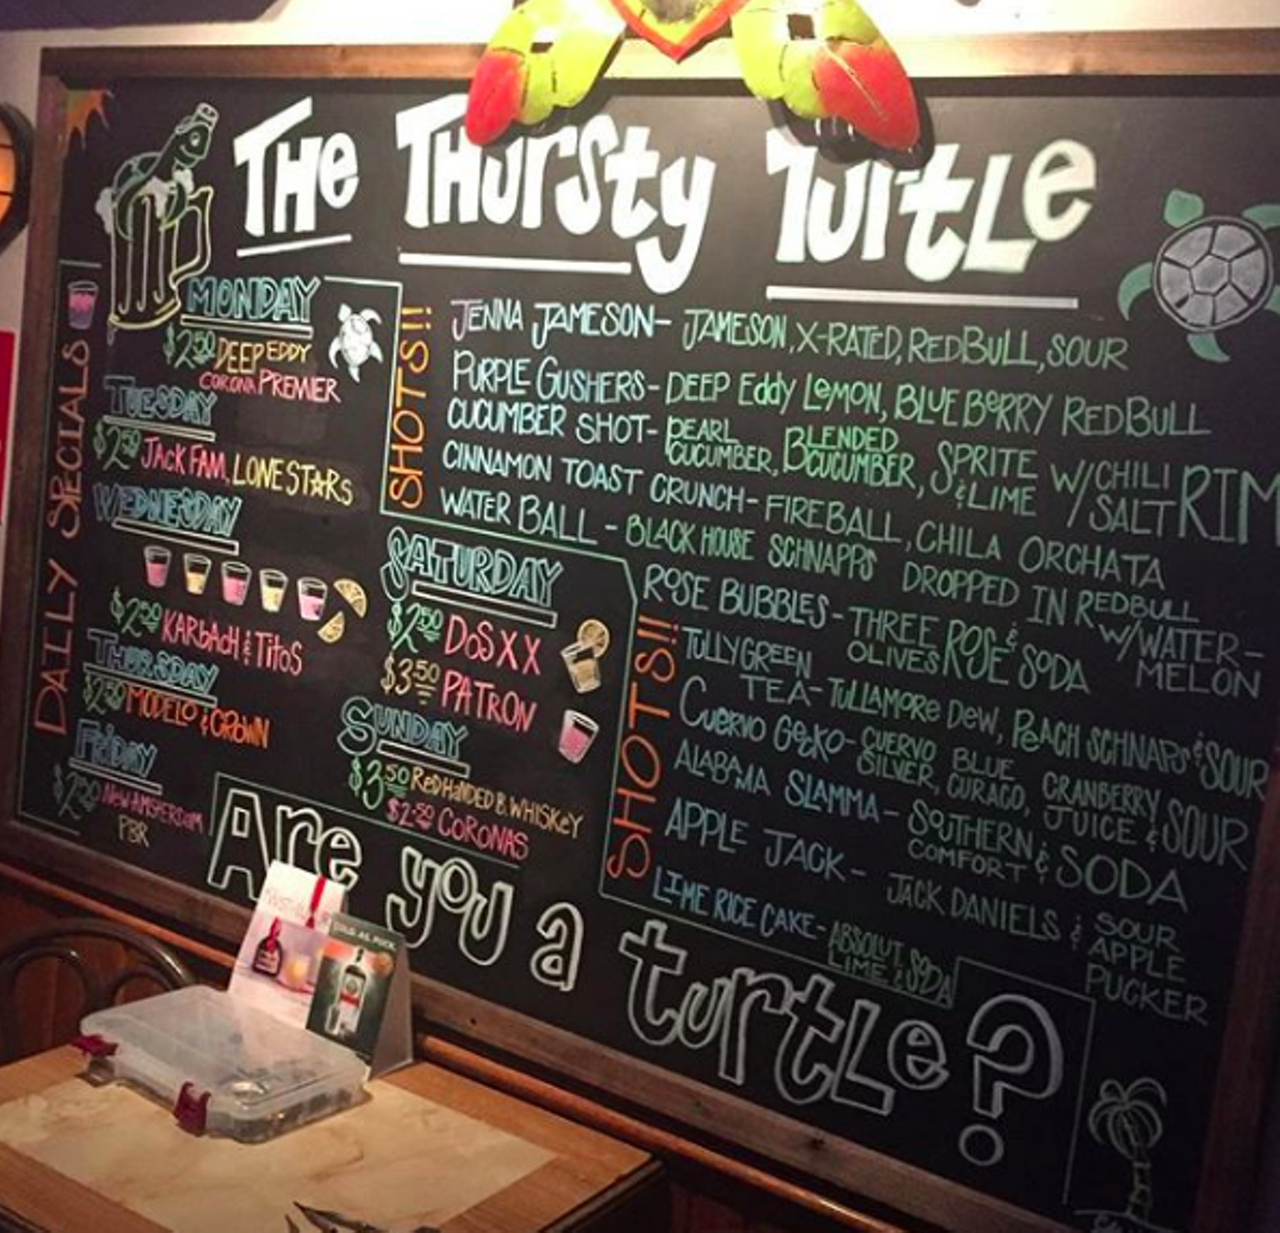 Thursty Turtle
1626 NE Interstate 410 Loop, (210) 820-3600, facebook.com/TheThurstyTurtle
Turtles may not seem like a theme, but they totally are here. From the laid-back vibes that are totally in the vein of turtles, to the giant-ass shell enclosed in a glass case on the wall, turtles are definitely celebrated here. Grab some drinks and toast to the beloved reptile.
Photo via Instagram / yurikostun